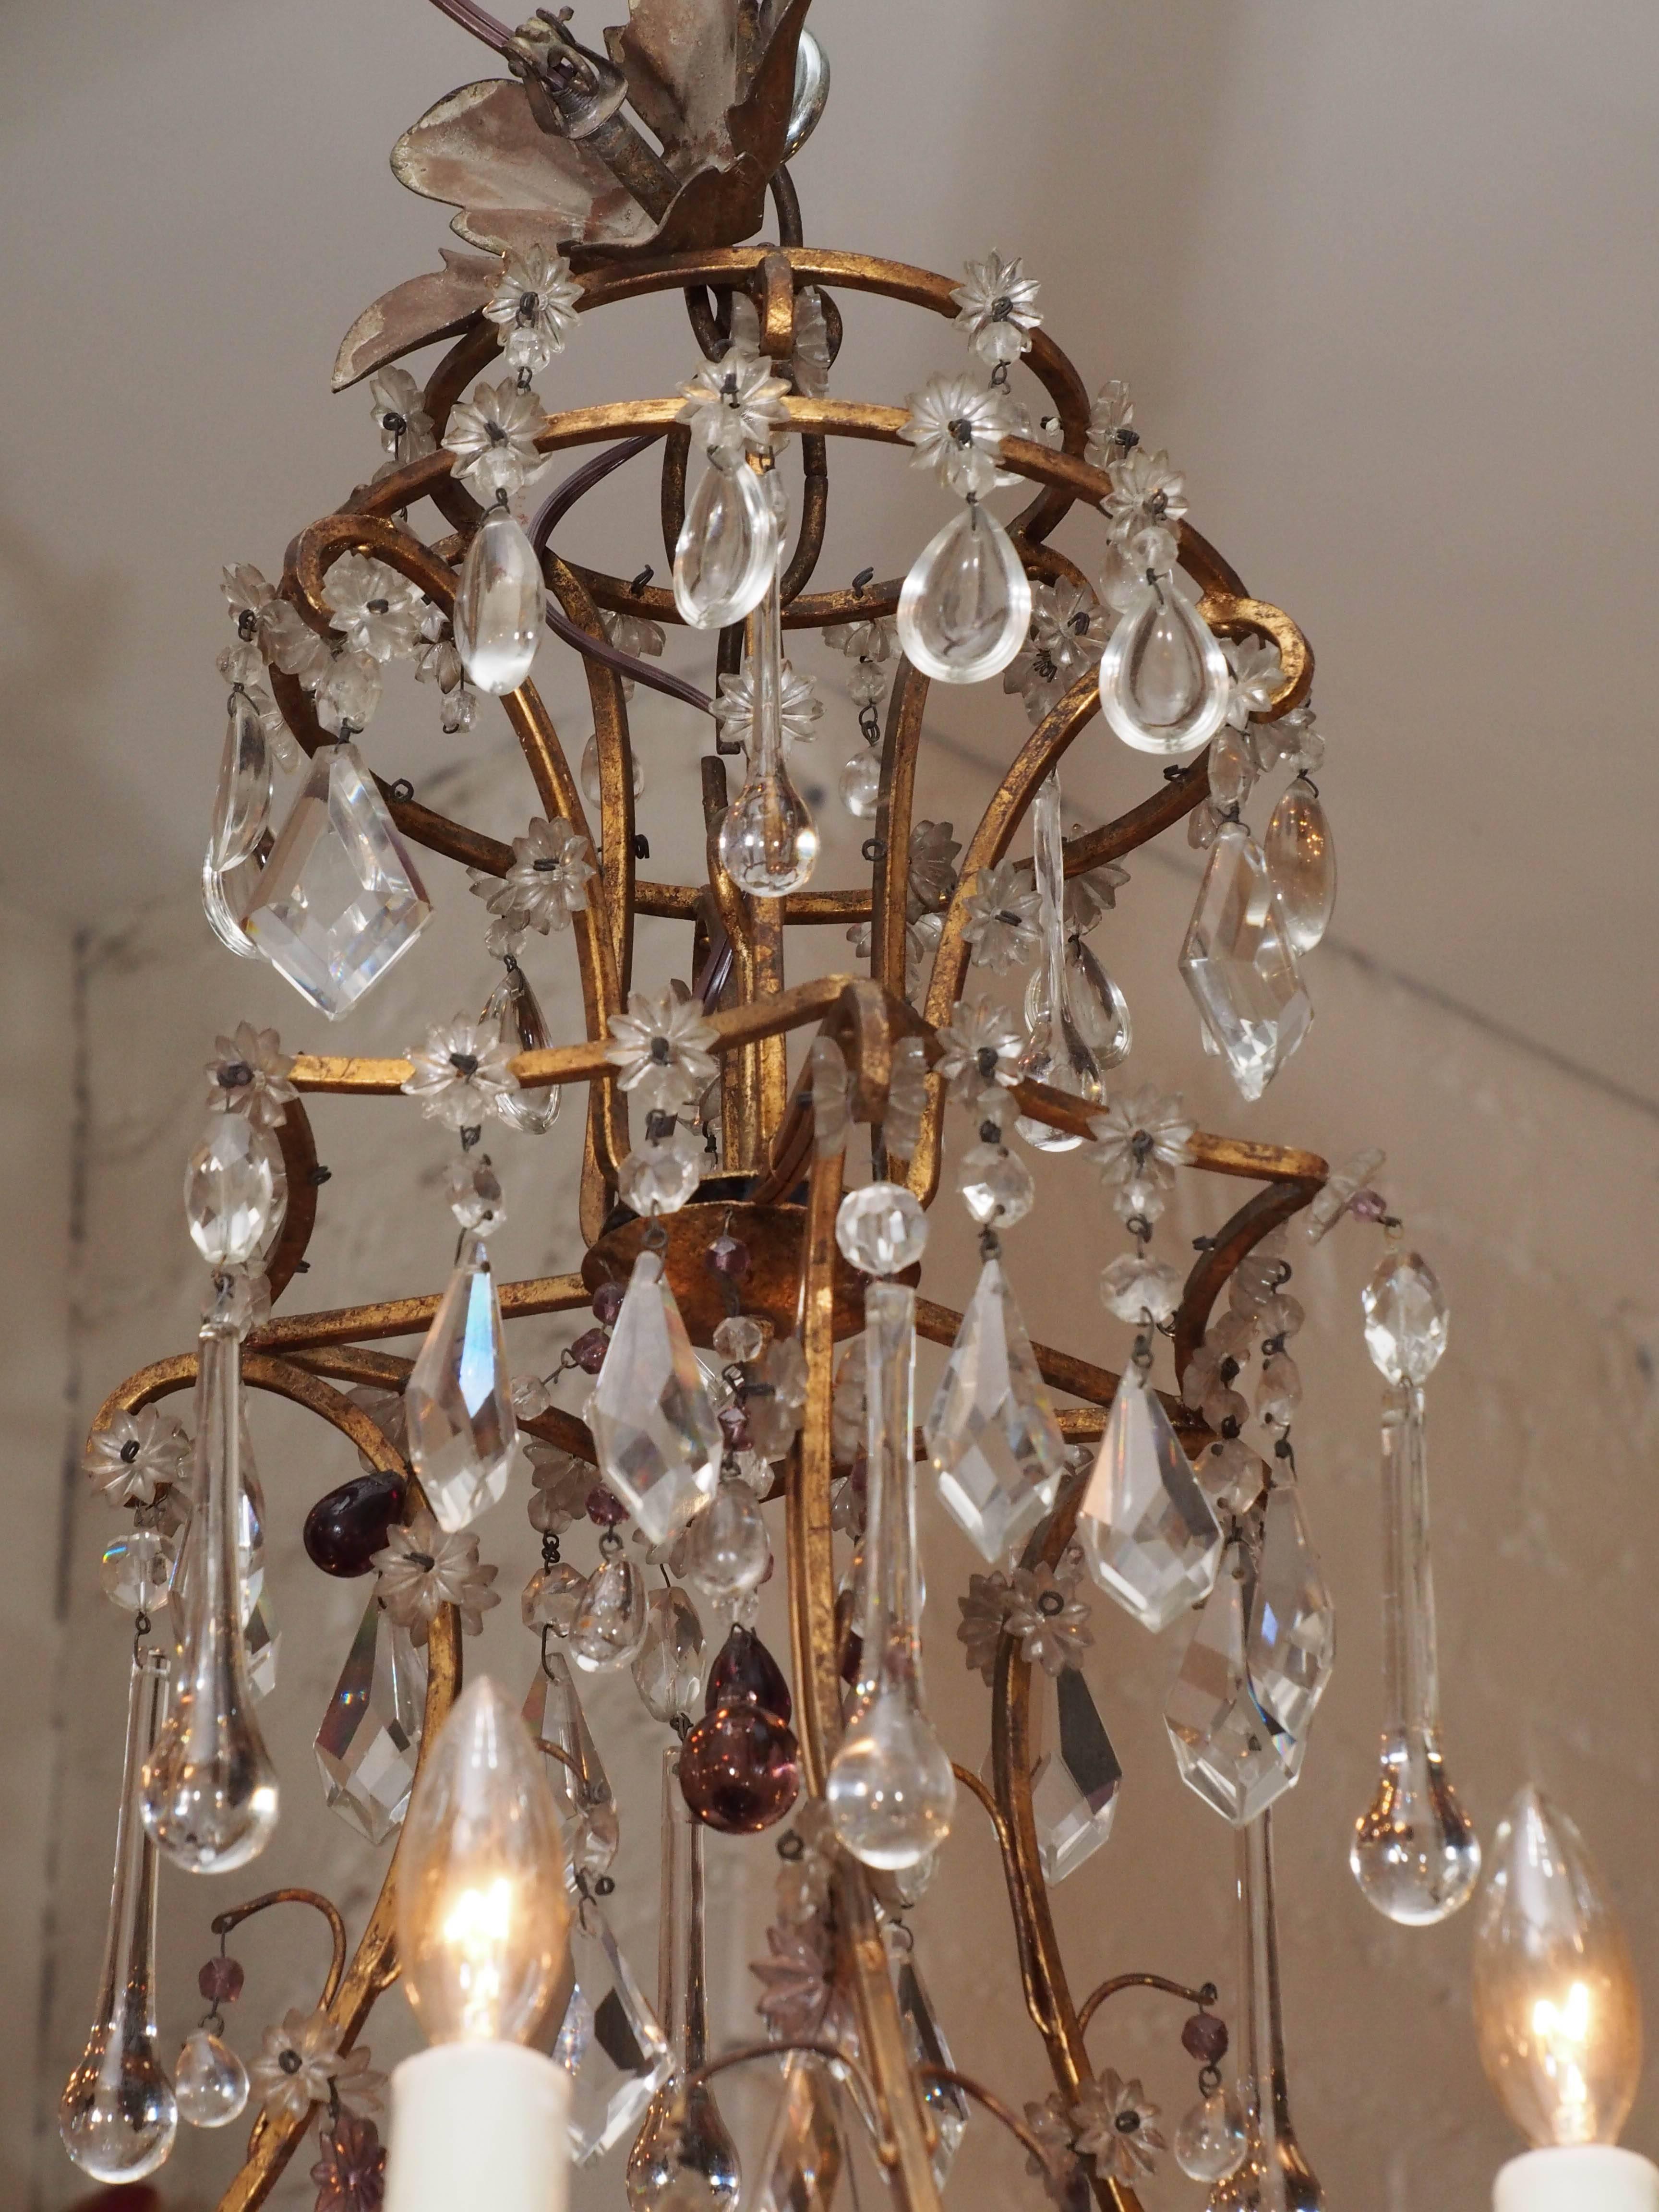 Italian cage form gilt iron and crystal chandelier with six lights.